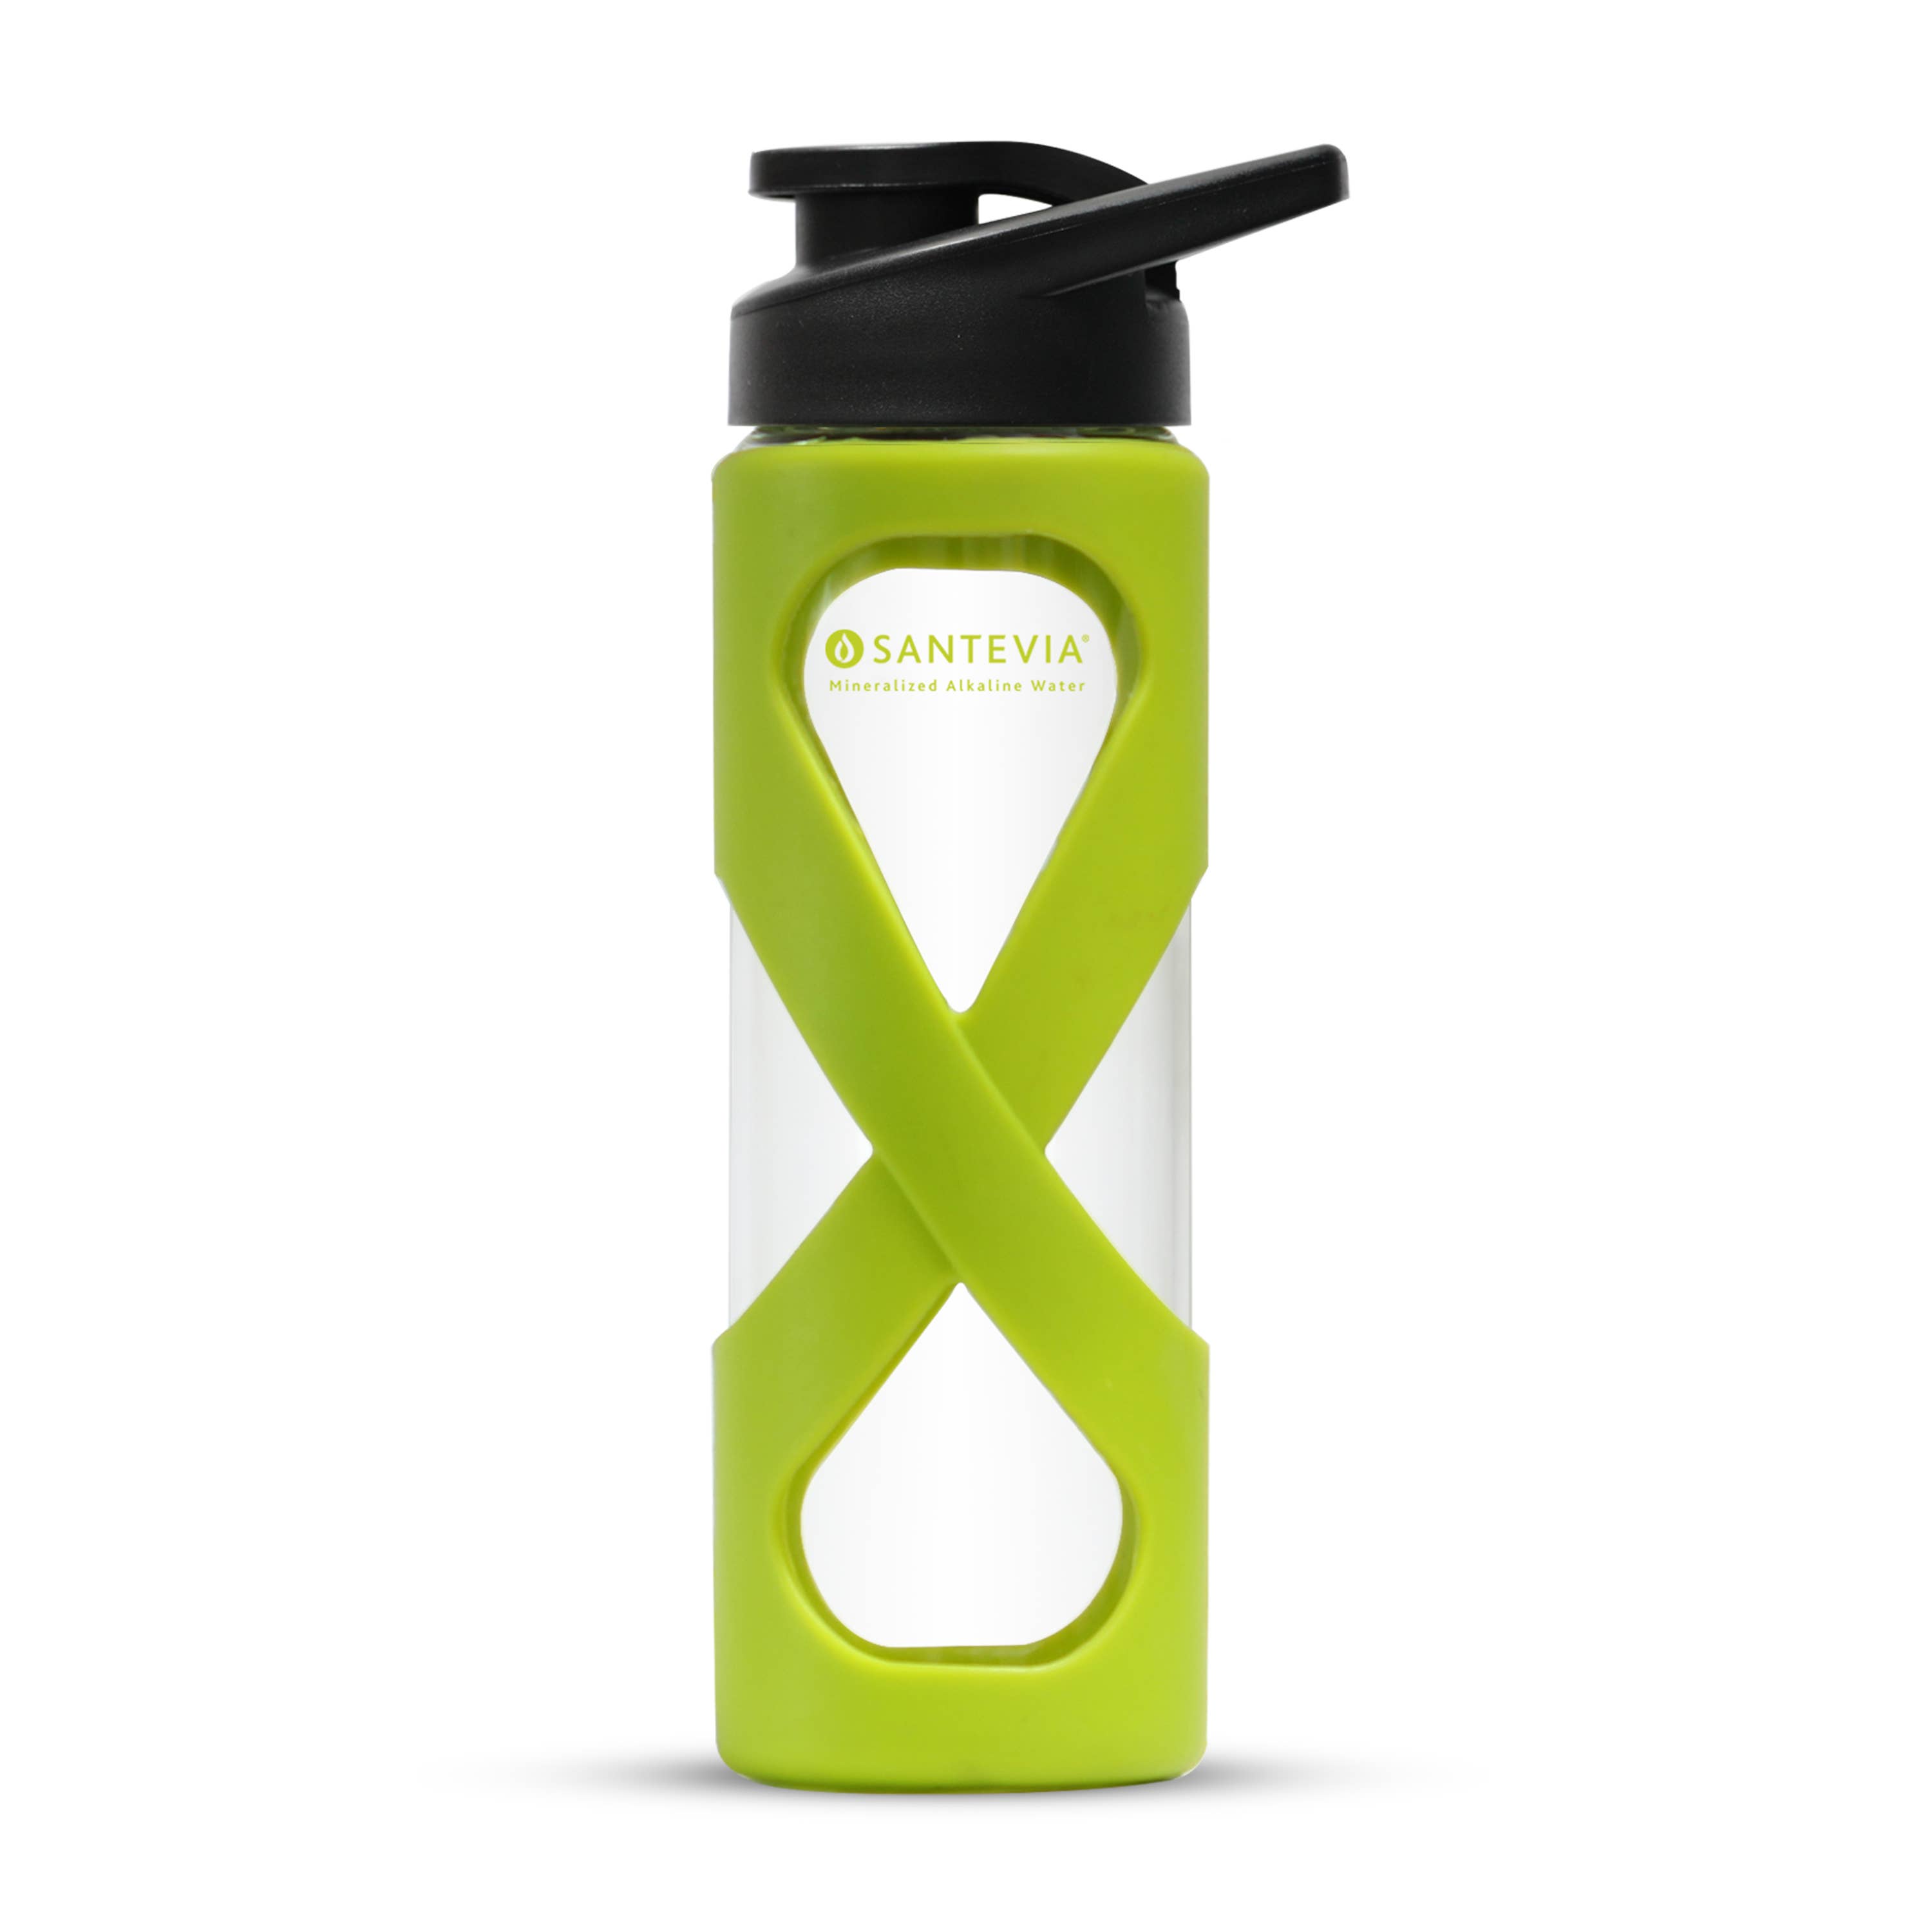 Love Bottle, American Made Reusable Glass Water Bottles by Minna